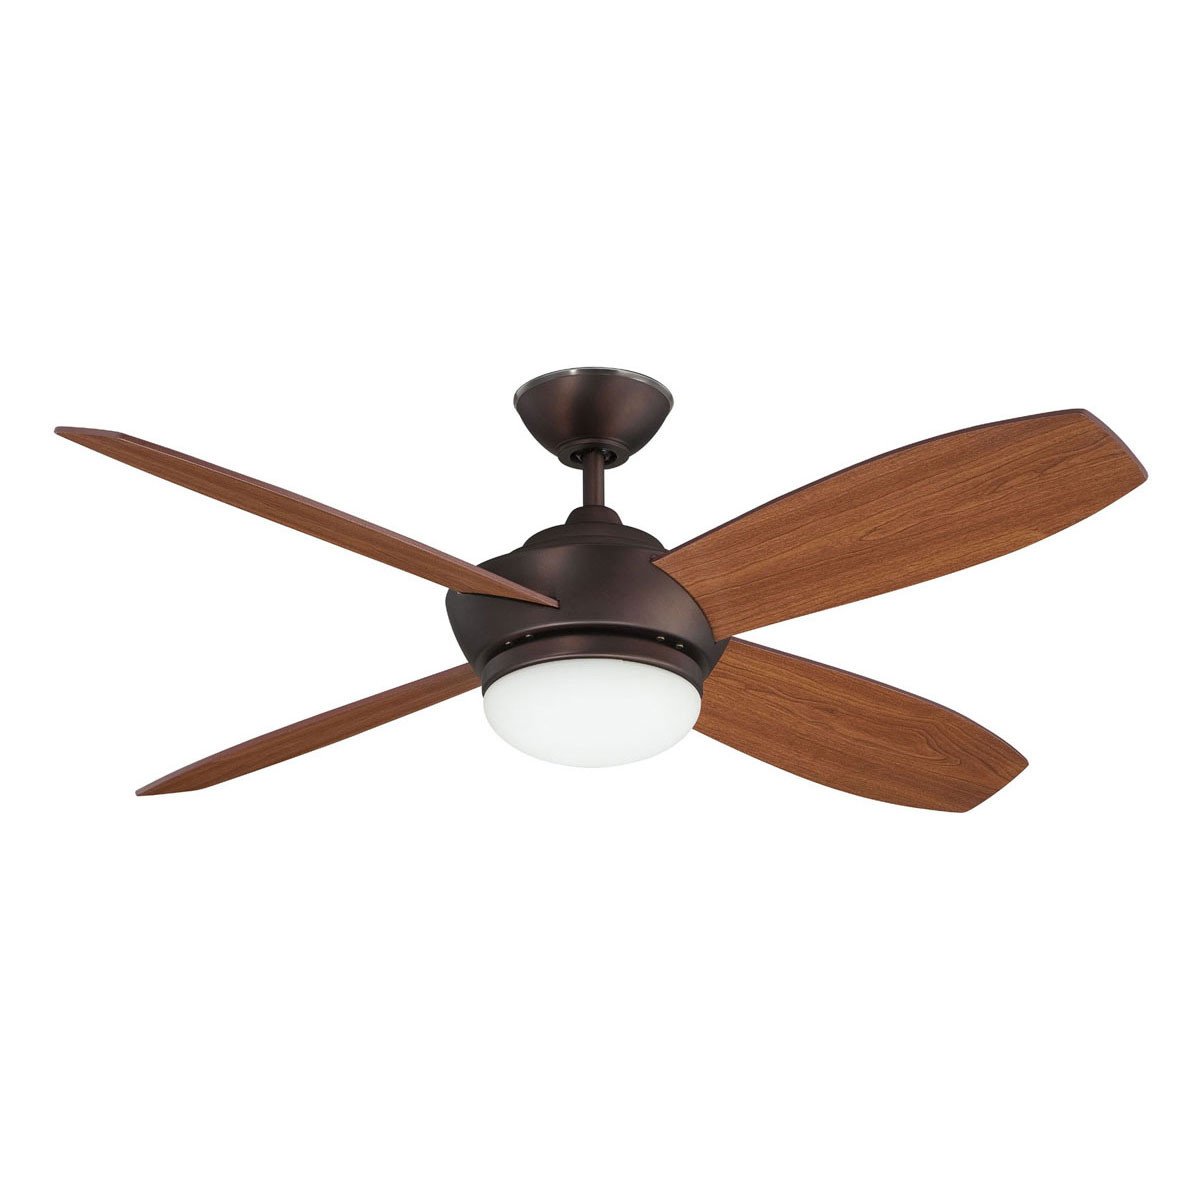 Concord Fans 52" Oil Brushed Bronze Ceiling Fan with Light and Remote Control